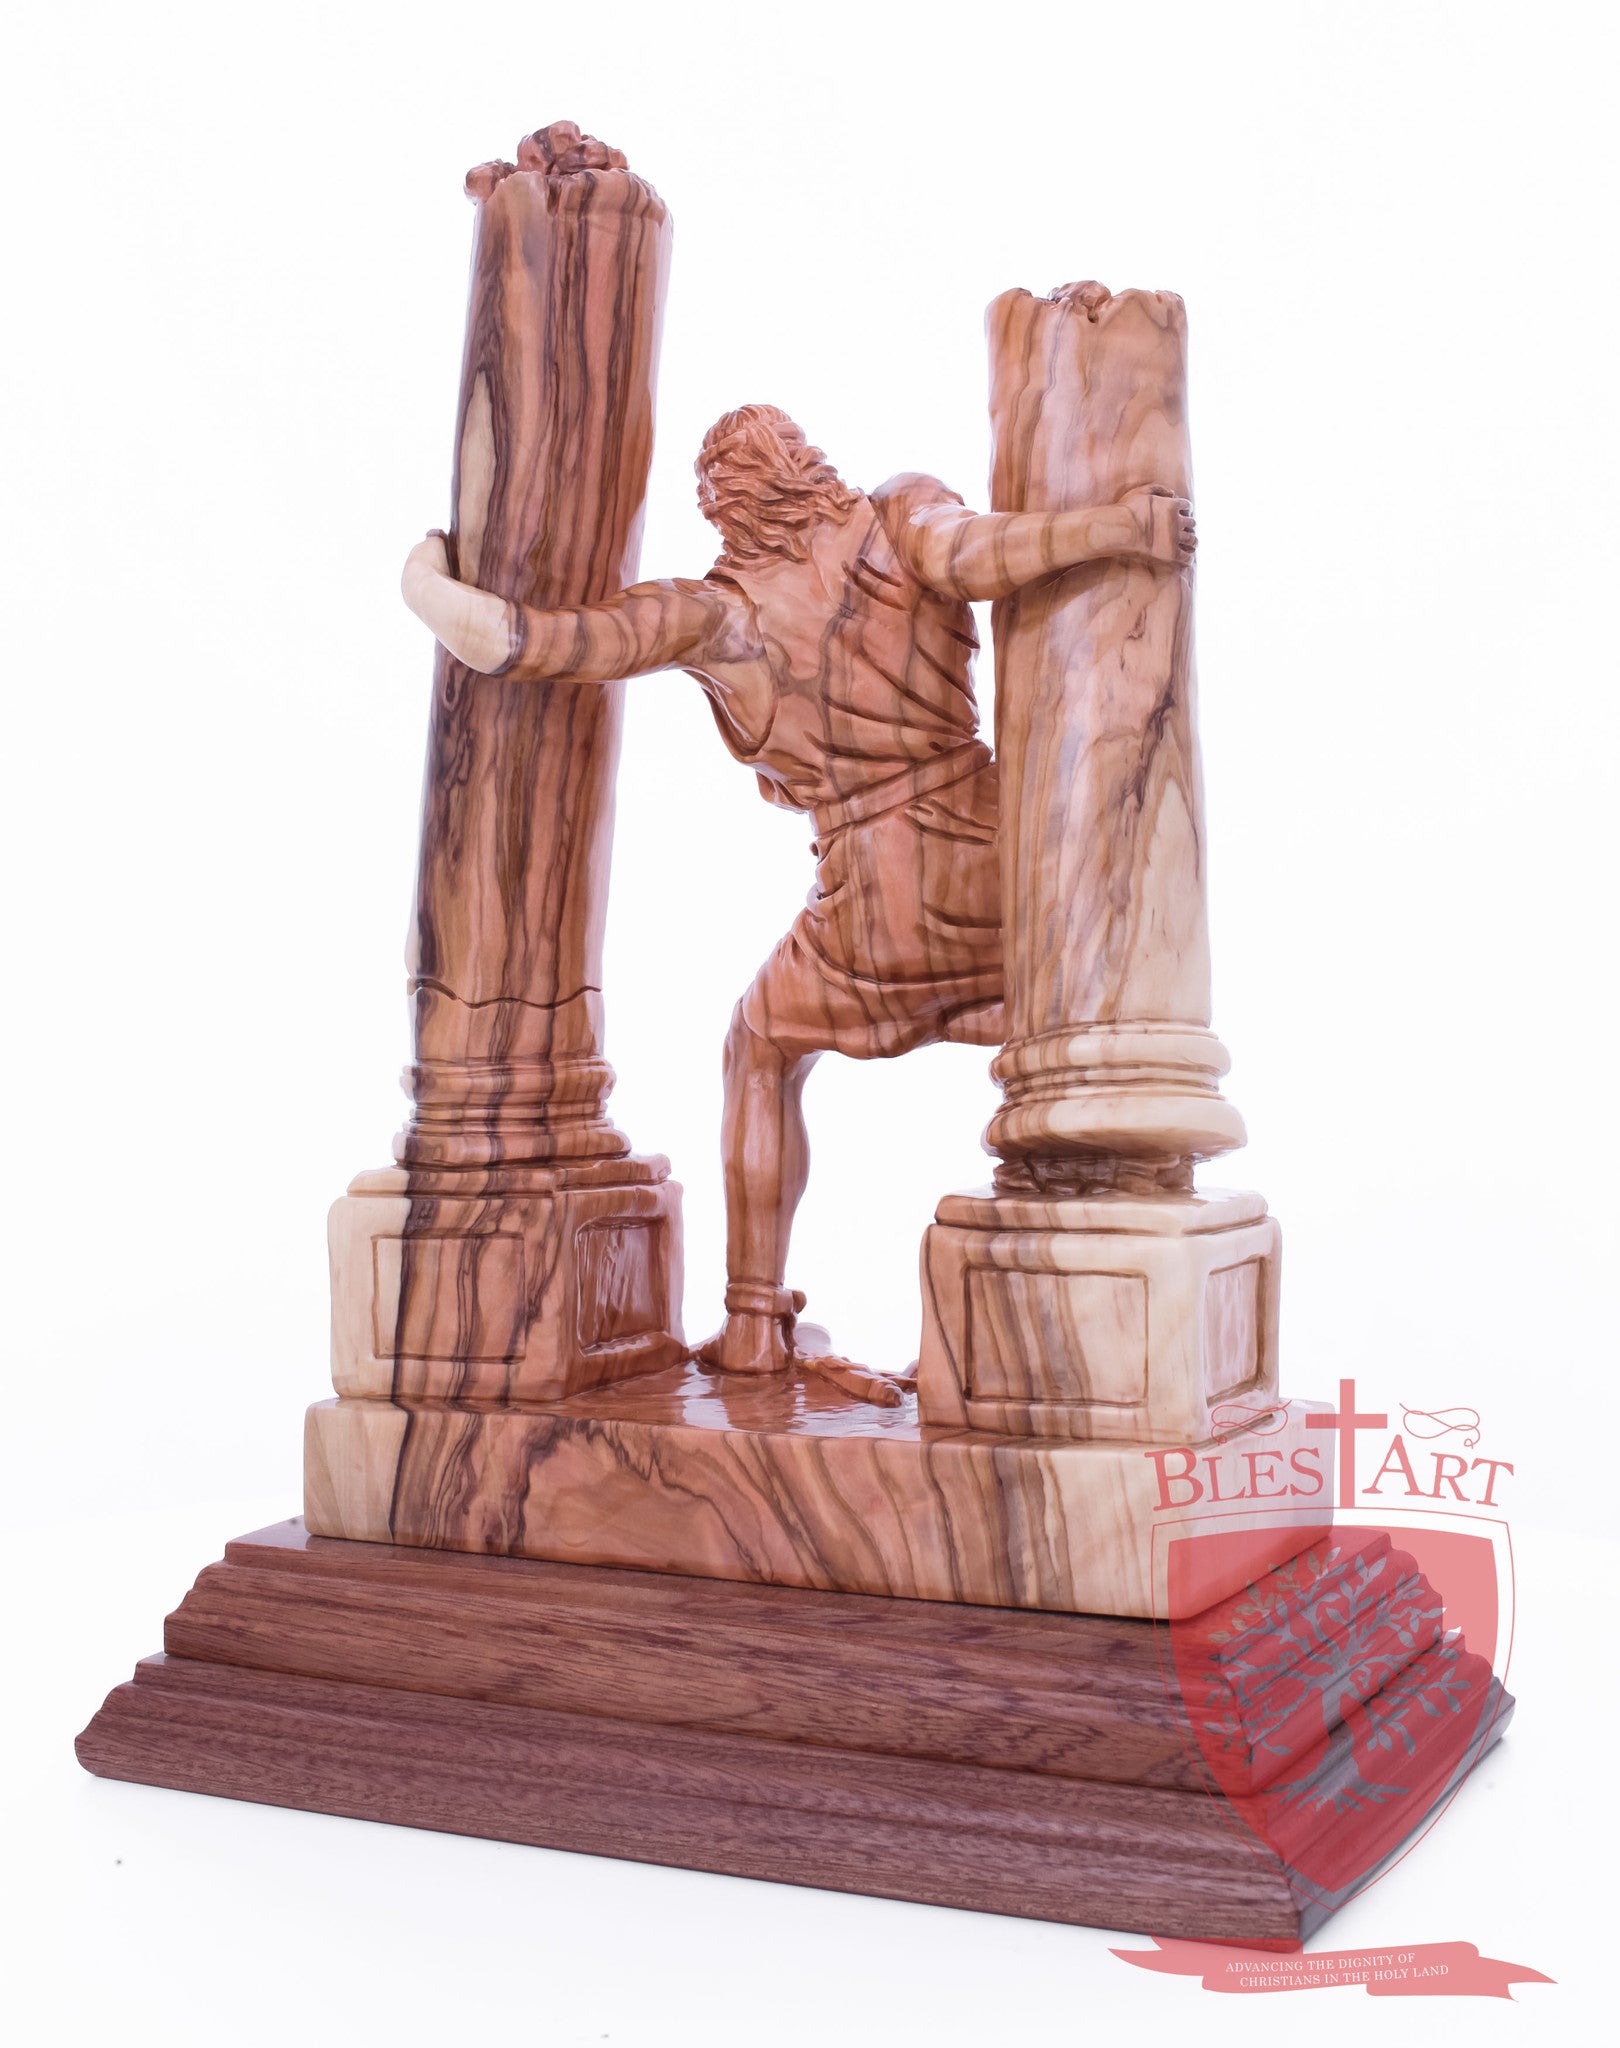 Samson destroying the temple, Size: 8.5" 5" 11.5"